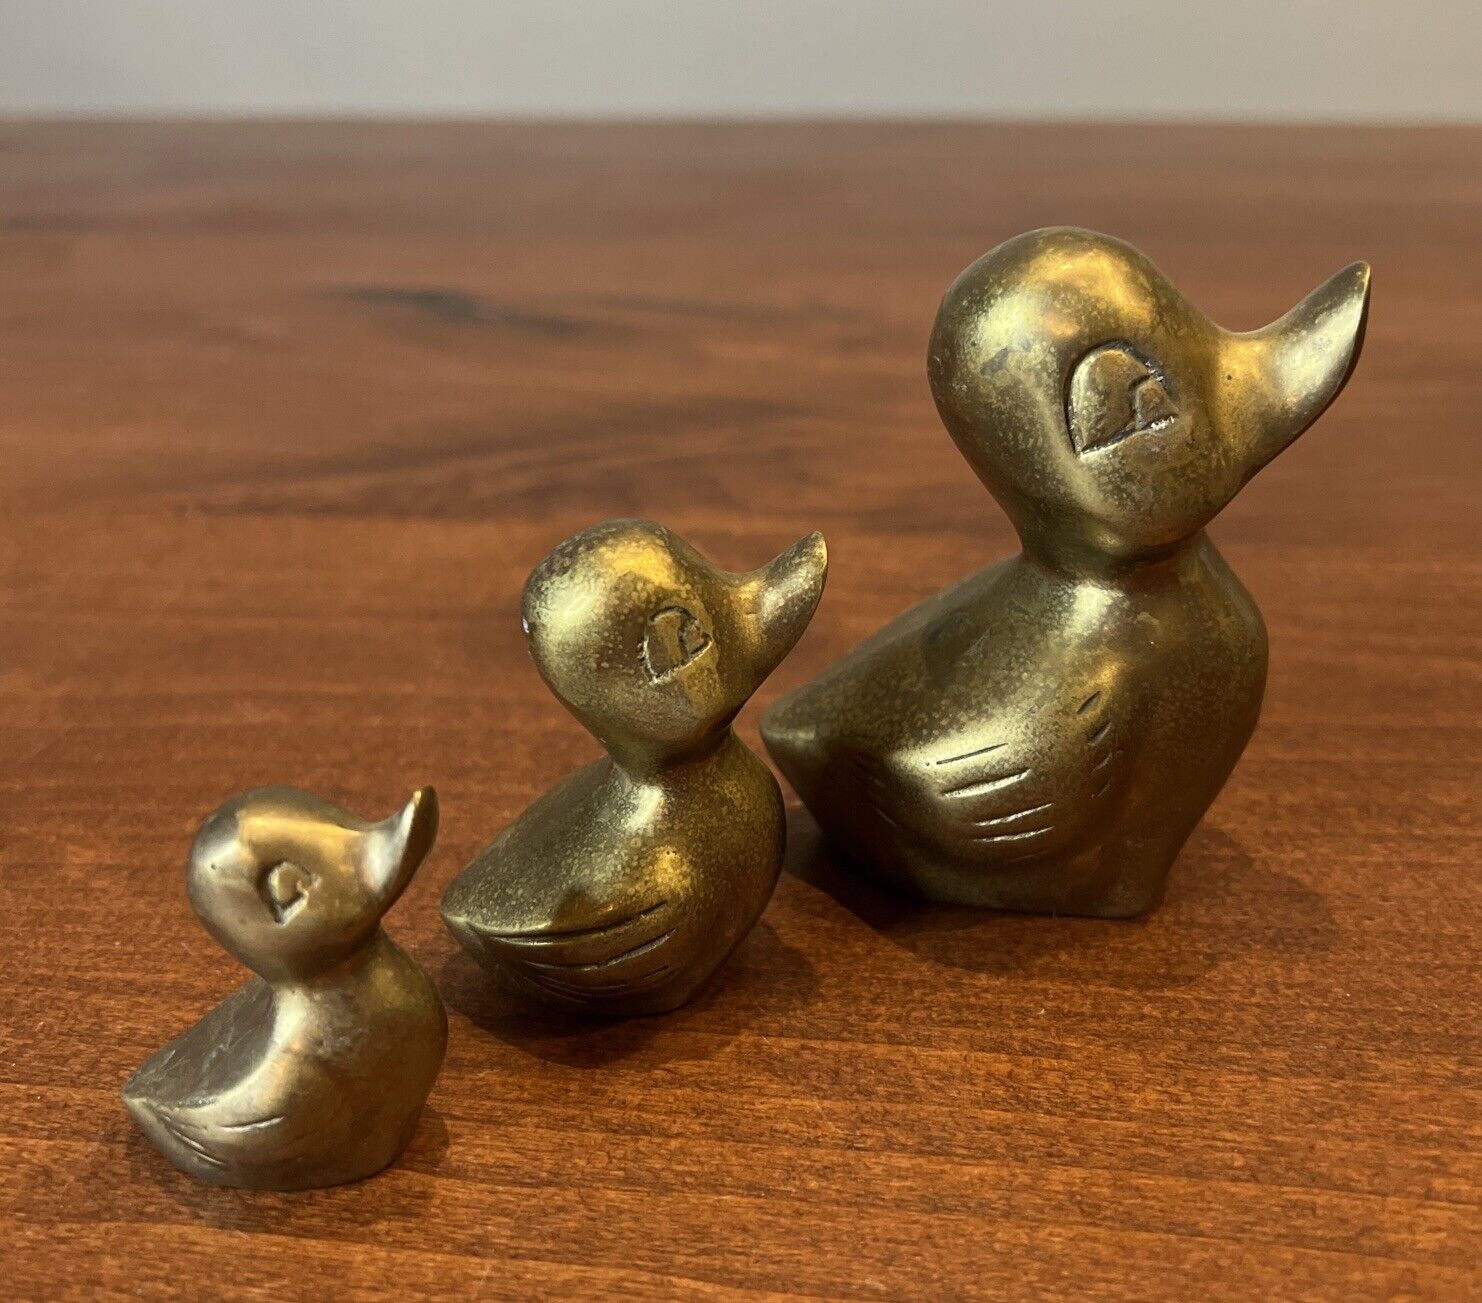 VTG Solid Brass Duck Family Figurine Set of 3 Mama/Ducklings 3” MCM Home Decor